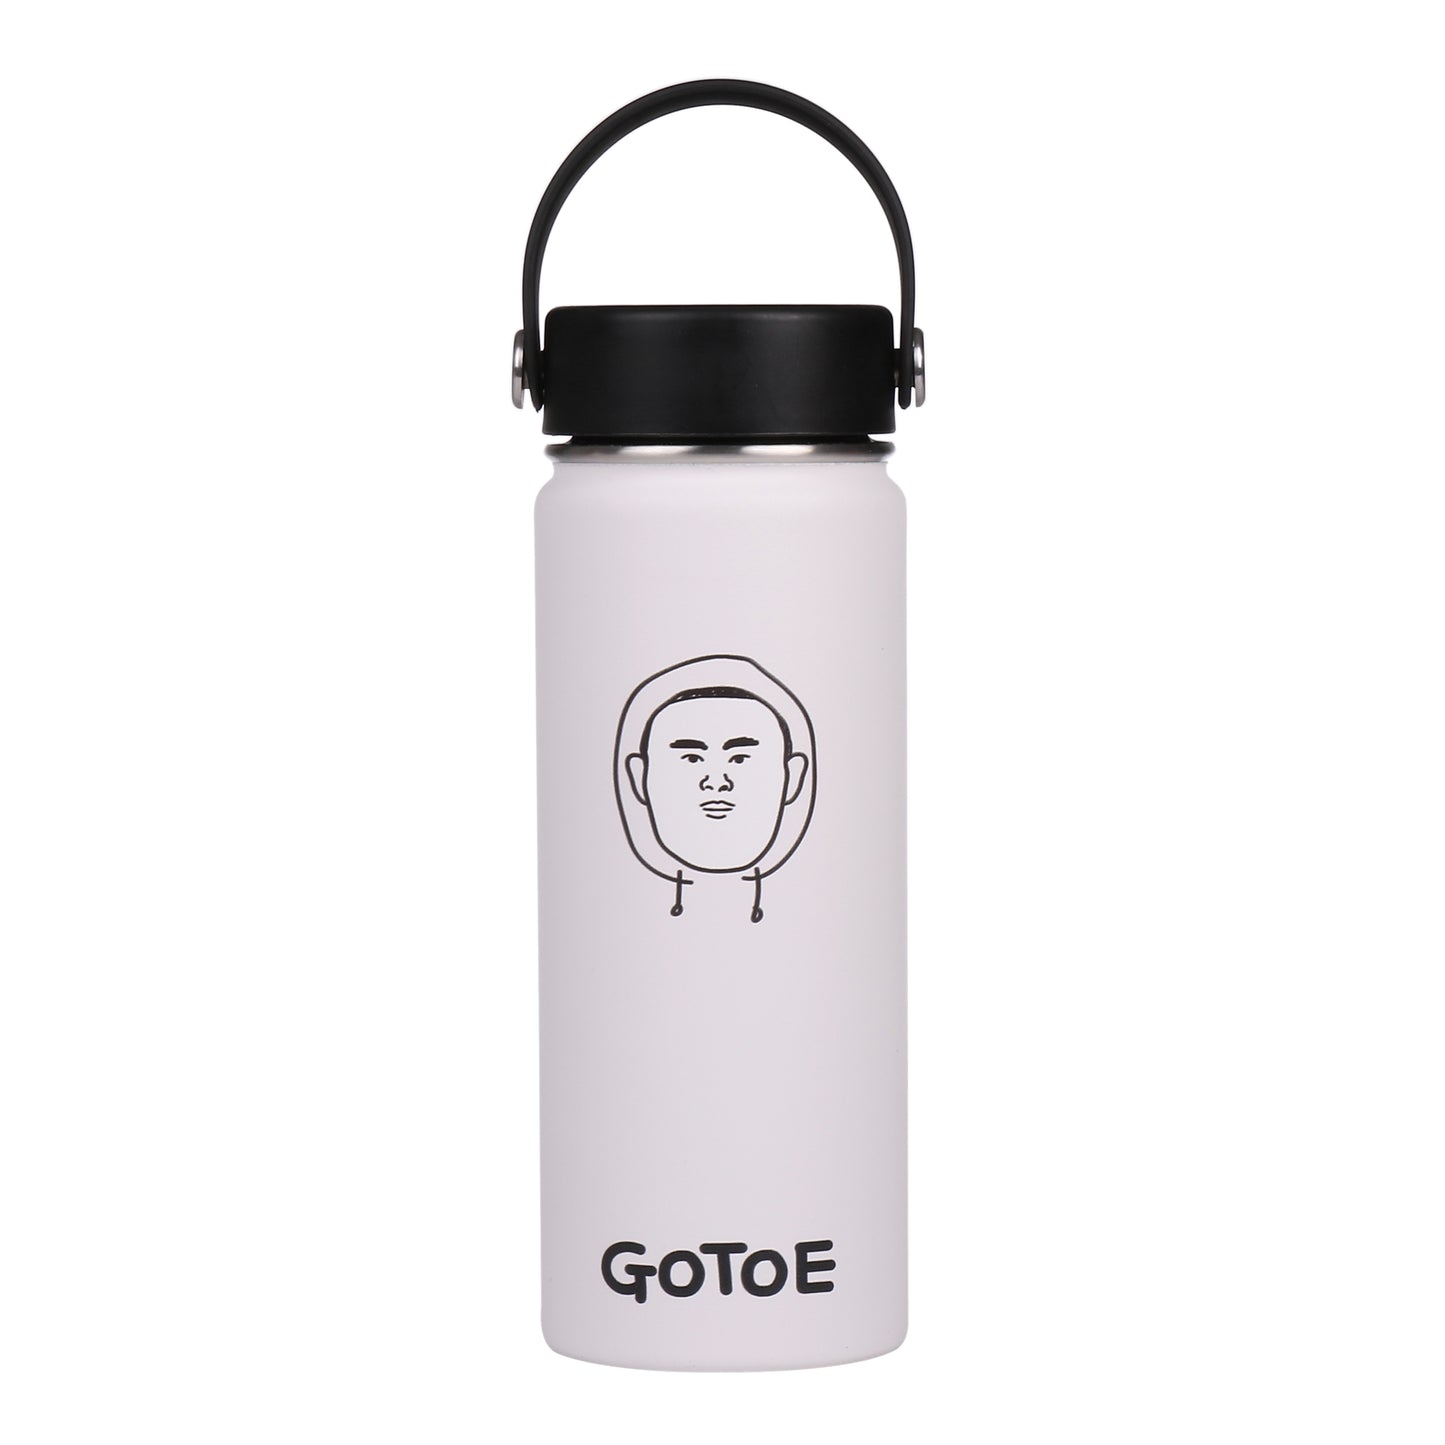 LIMITED EDITION GOTOE Water Bottle